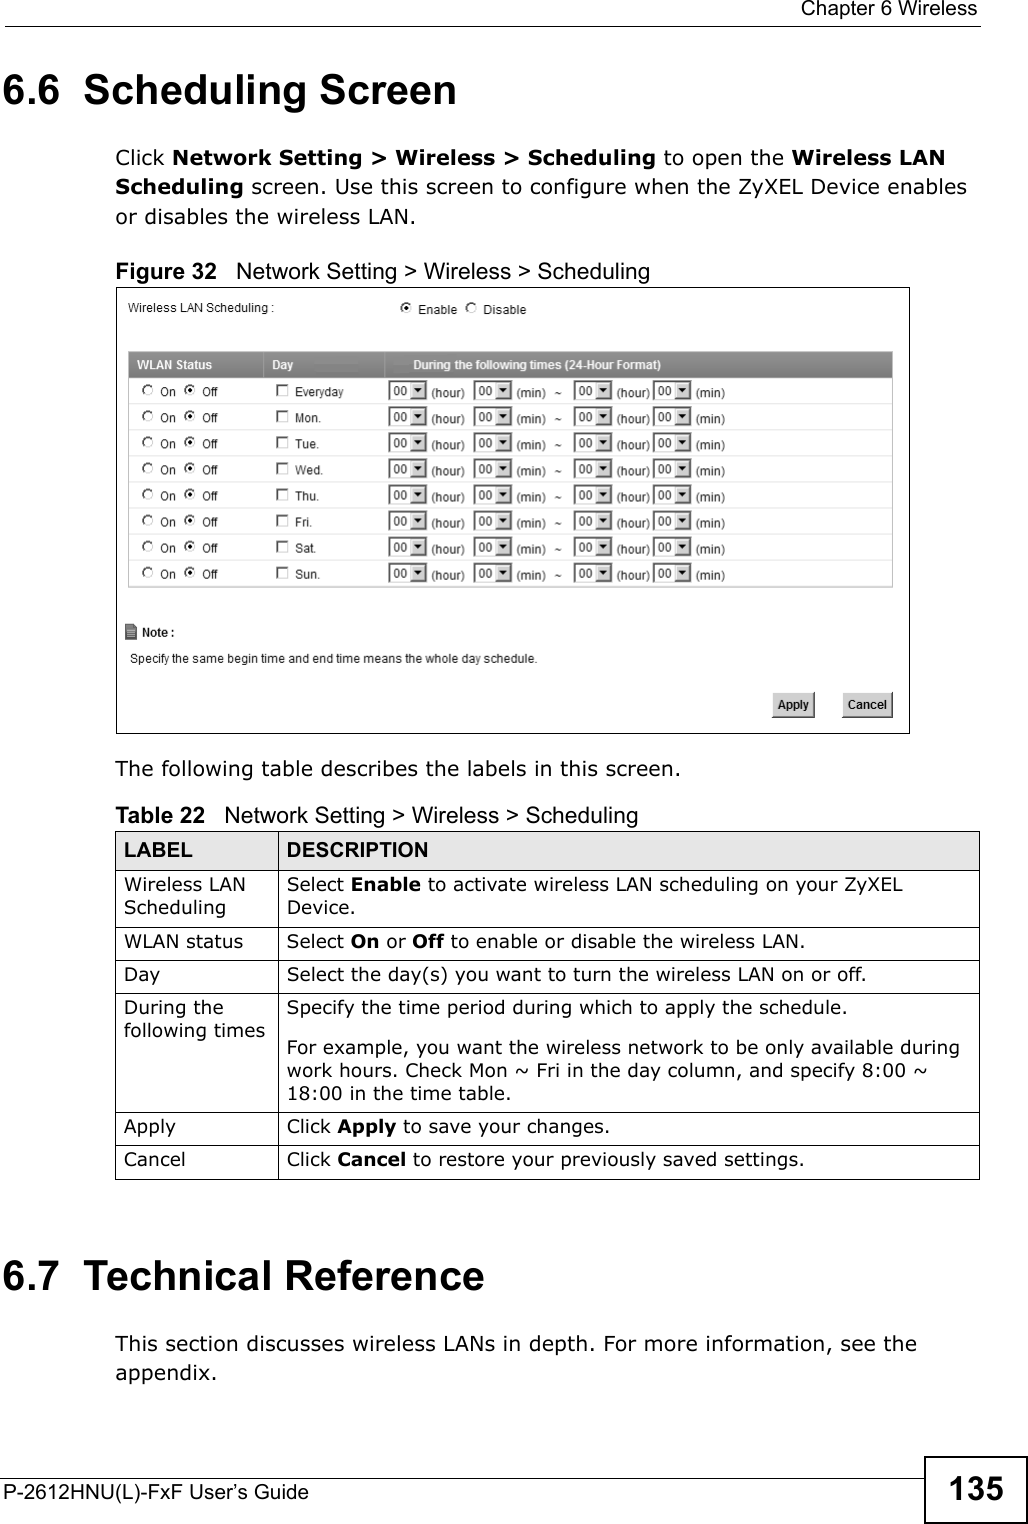  Chapter 6 WirelessP-2612HNU(L)-FxF User’s Guide 1356.6  Scheduling Screen Click Network Setting &gt; Wireless &gt; Scheduling to open the Wireless LAN Scheduling screen. Use this screen to configure when the ZyXEL Device enables or disables the wireless LAN.  Figure 32   Network Setting &gt; Wireless &gt; SchedulingThe following table describes the labels in this screen.6.7  Technical ReferenceThis section discusses wireless LANs in depth. For more information, see the appendix.Table 22   Network Setting &gt; Wireless &gt; SchedulingLABEL DESCRIPTIONWireless LAN SchedulingSelect Enable to activate wireless LAN scheduling on your ZyXEL Device.WLAN status Select On or Off to enable or disable the wireless LAN.Day Select the day(s) you want to turn the wireless LAN on or off.During the following timesSpecify the time period during which to apply the schedule.For example, you want the wireless network to be only available during work hours. Check Mon ~ Fri in the day column, and specify 8:00 ~ 18:00 in the time table.Apply Click Apply to save your changes.Cancel Click Cancel to restore your previously saved settings.